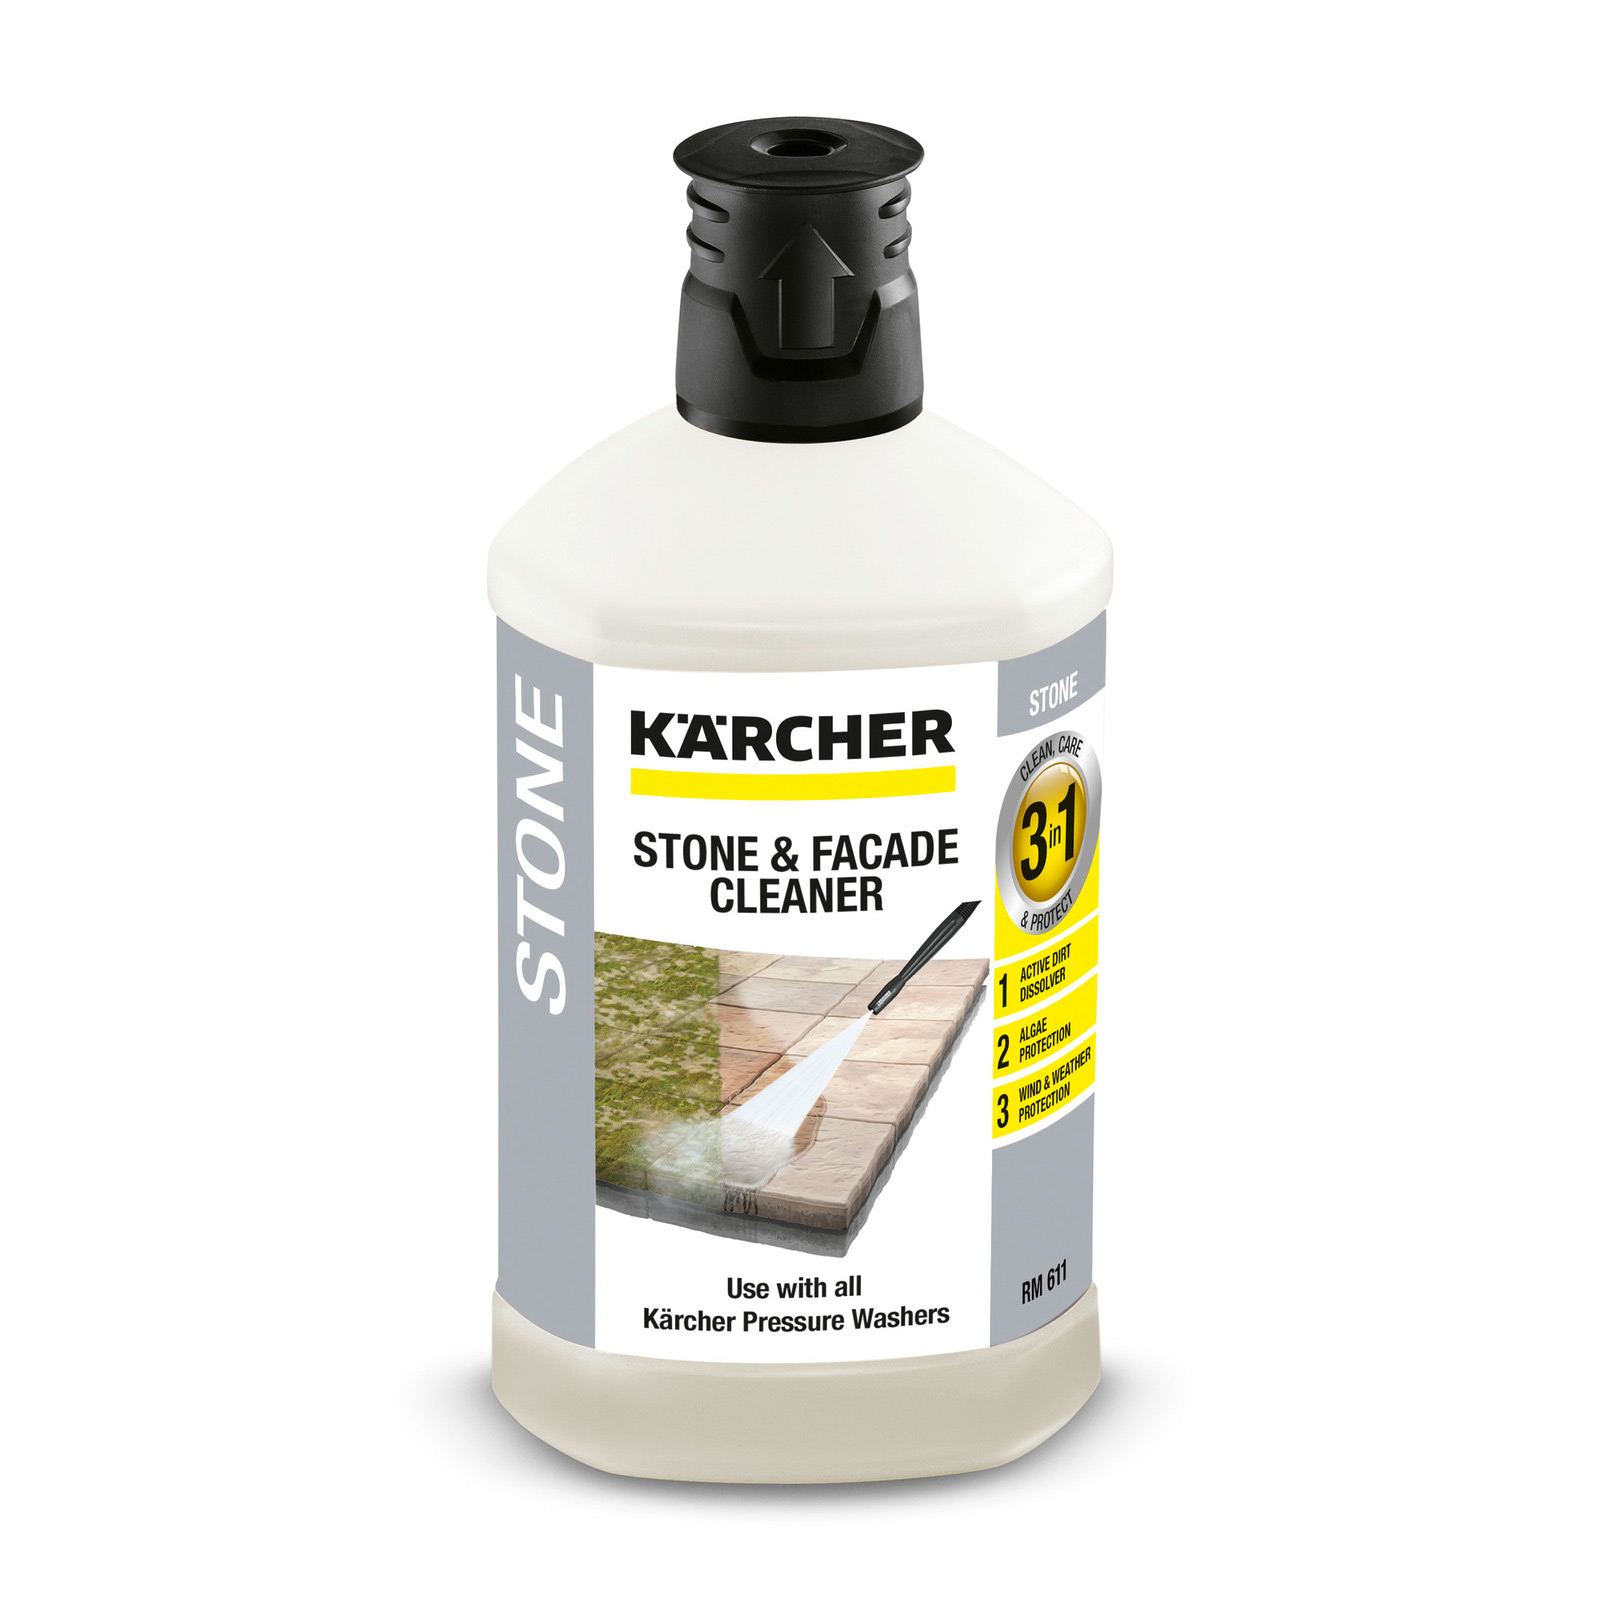 KARCHER 3-IN-1 STONE CLEANER